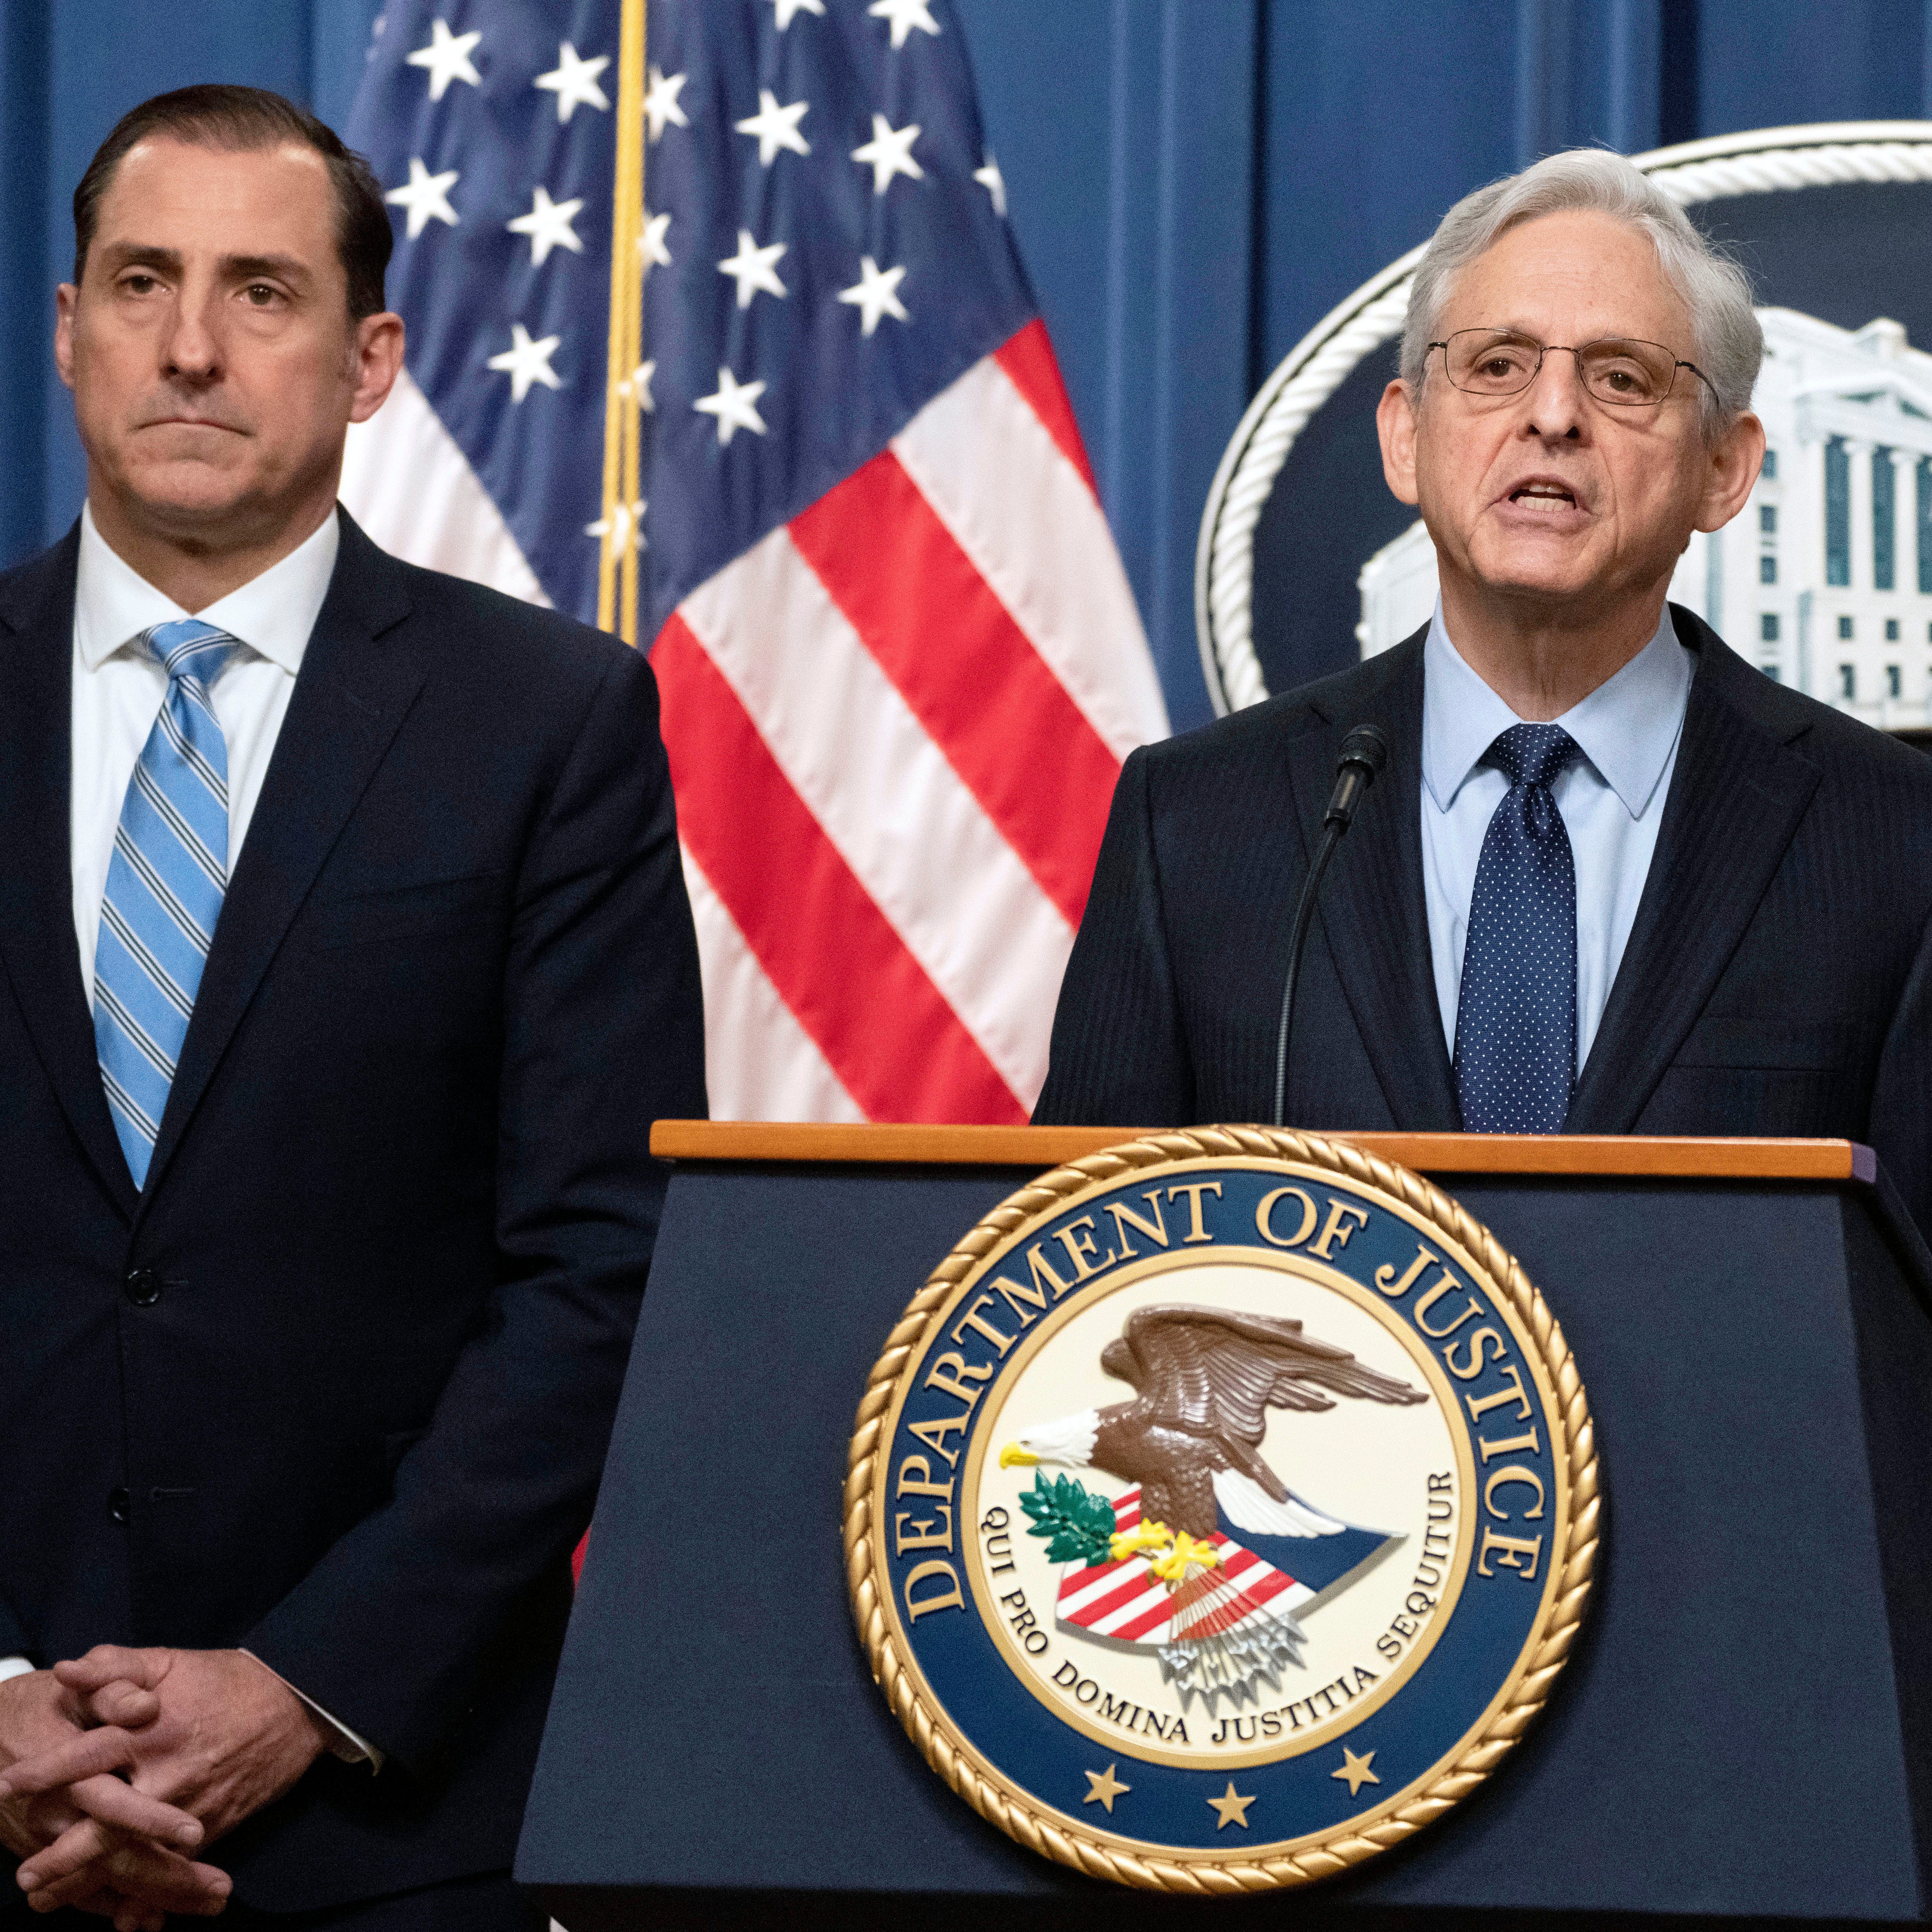 Attorney General Merrick Garland speaks during a news conference at the Department of Justice, Thursday, Jan. 12, 2023, in Washington, as John Lausch, the U.S. Attorney in Chicago, looks on.